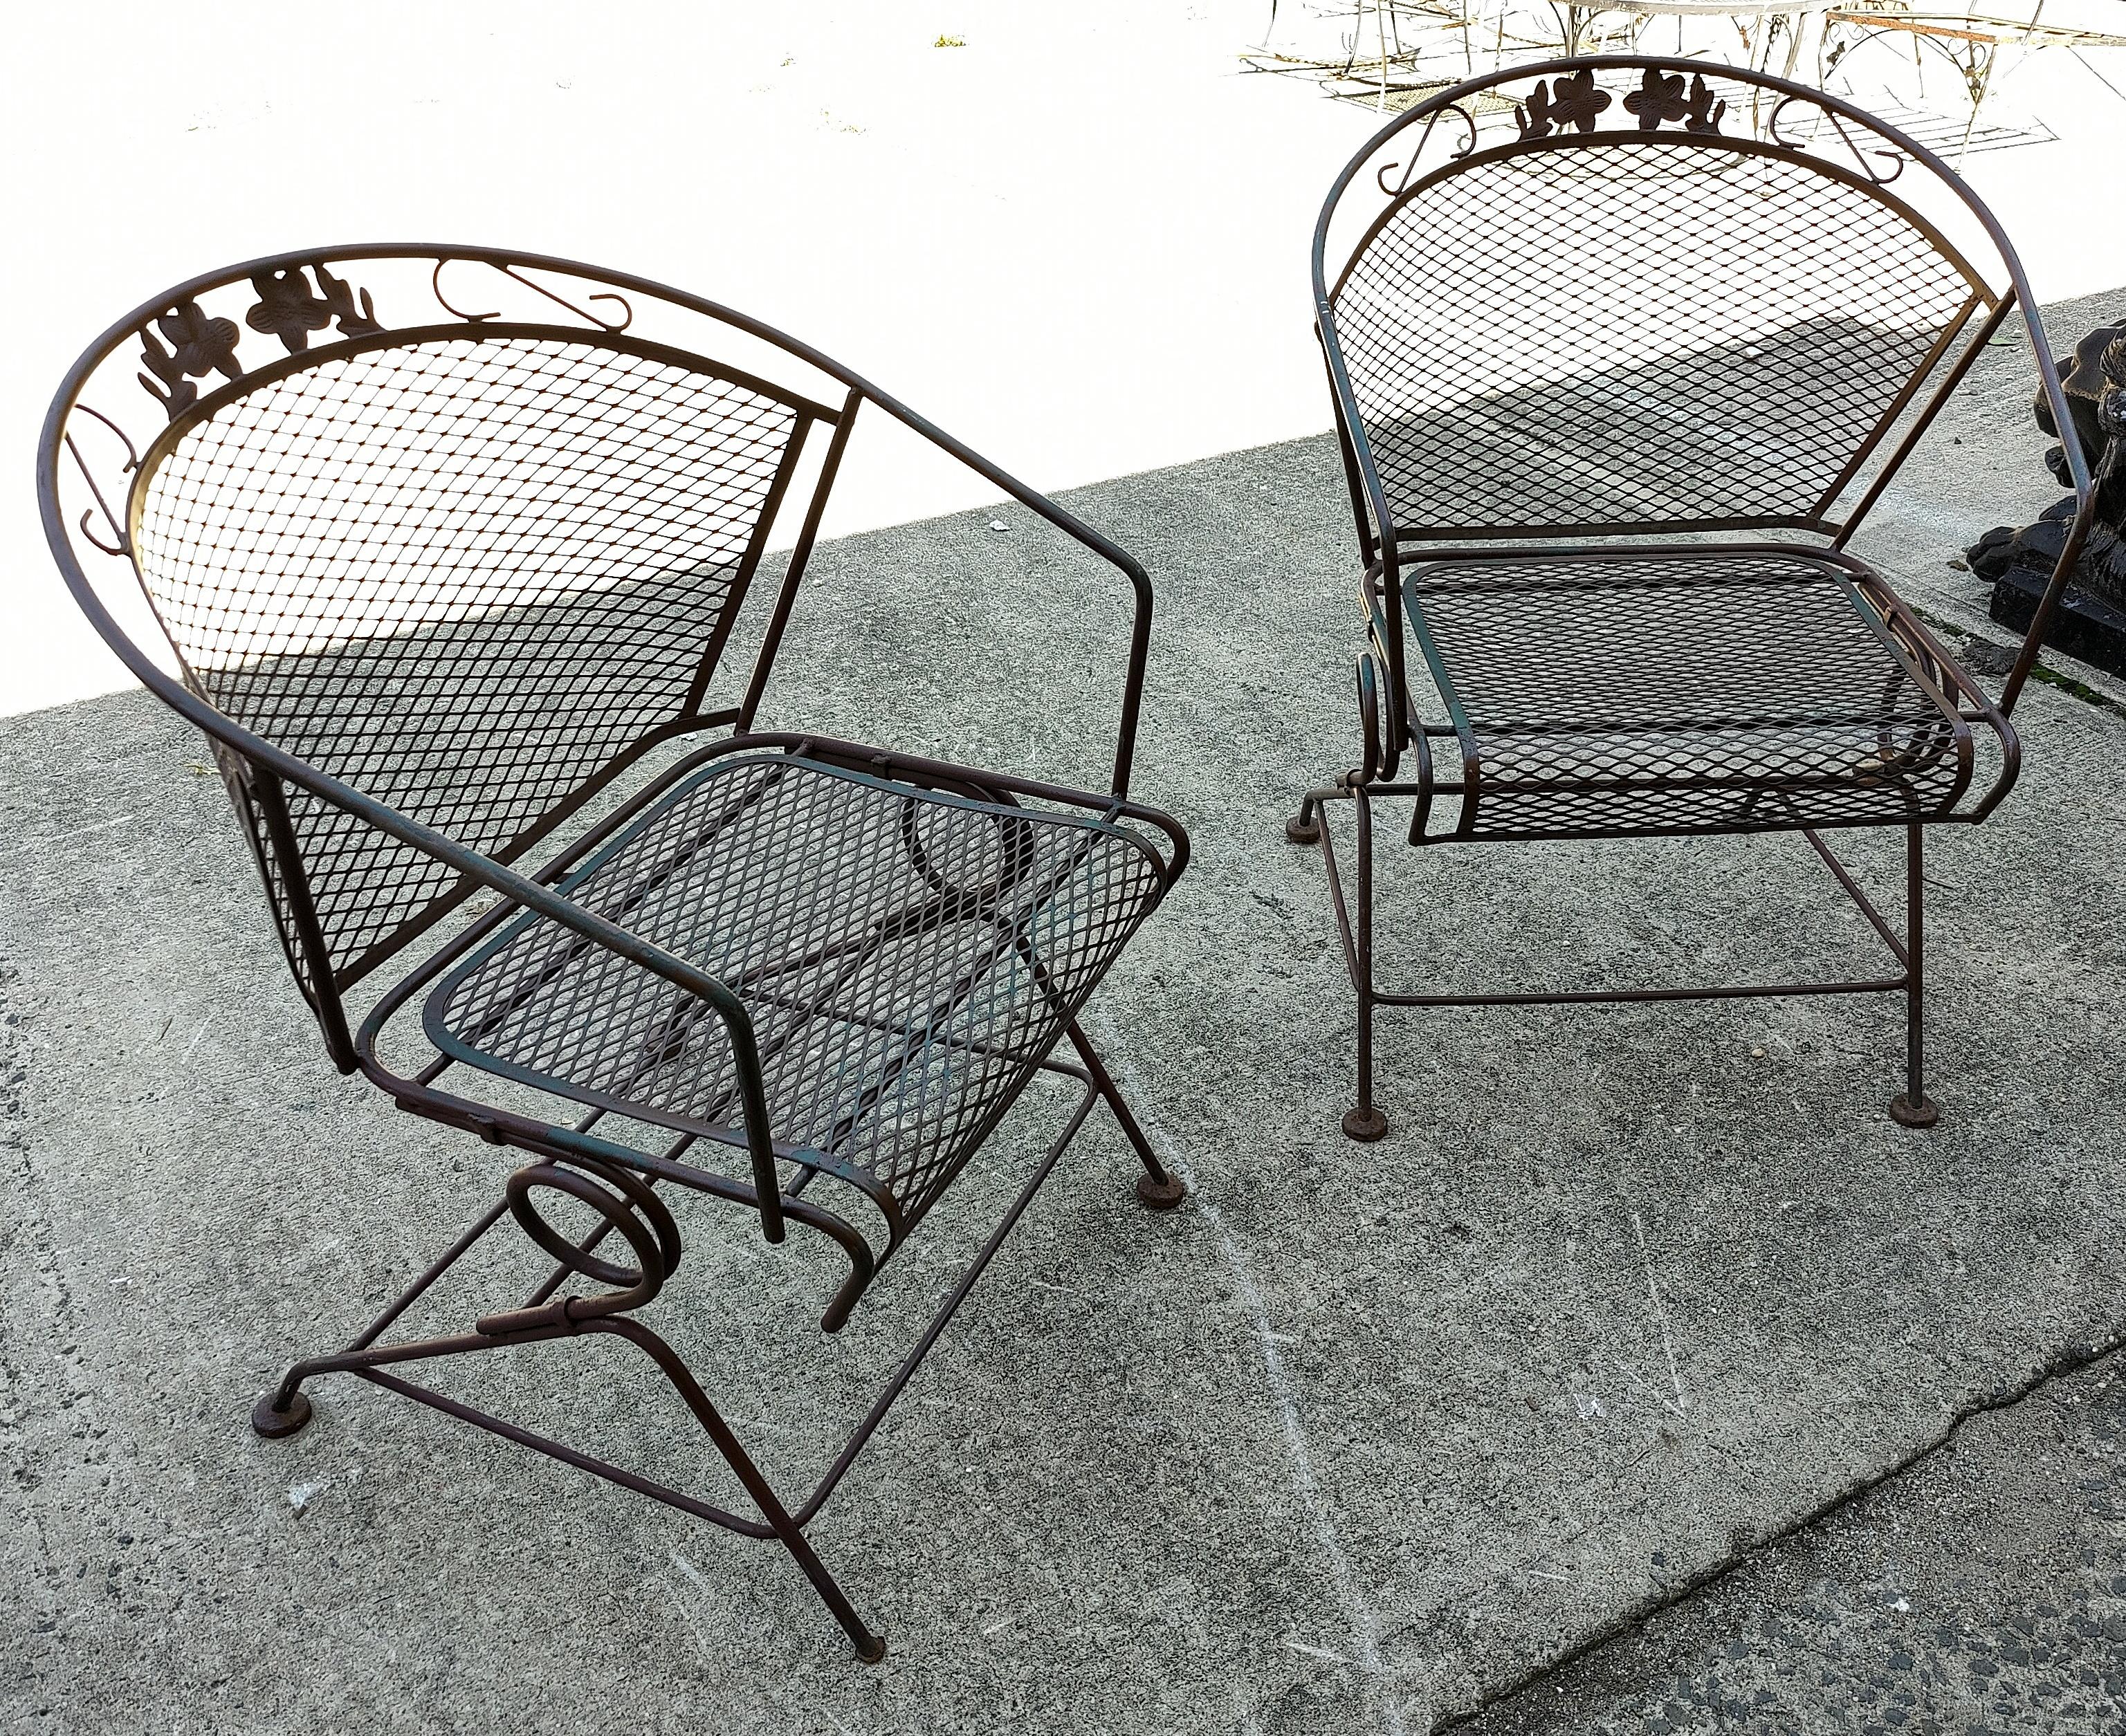 Vintage modern iron patio spring chairs. These gorgeous rockers feature elegant scrollwork and flower designs. Perfect for a deck, patio, or covered porch.

Please confirm item location (NY or NJ).